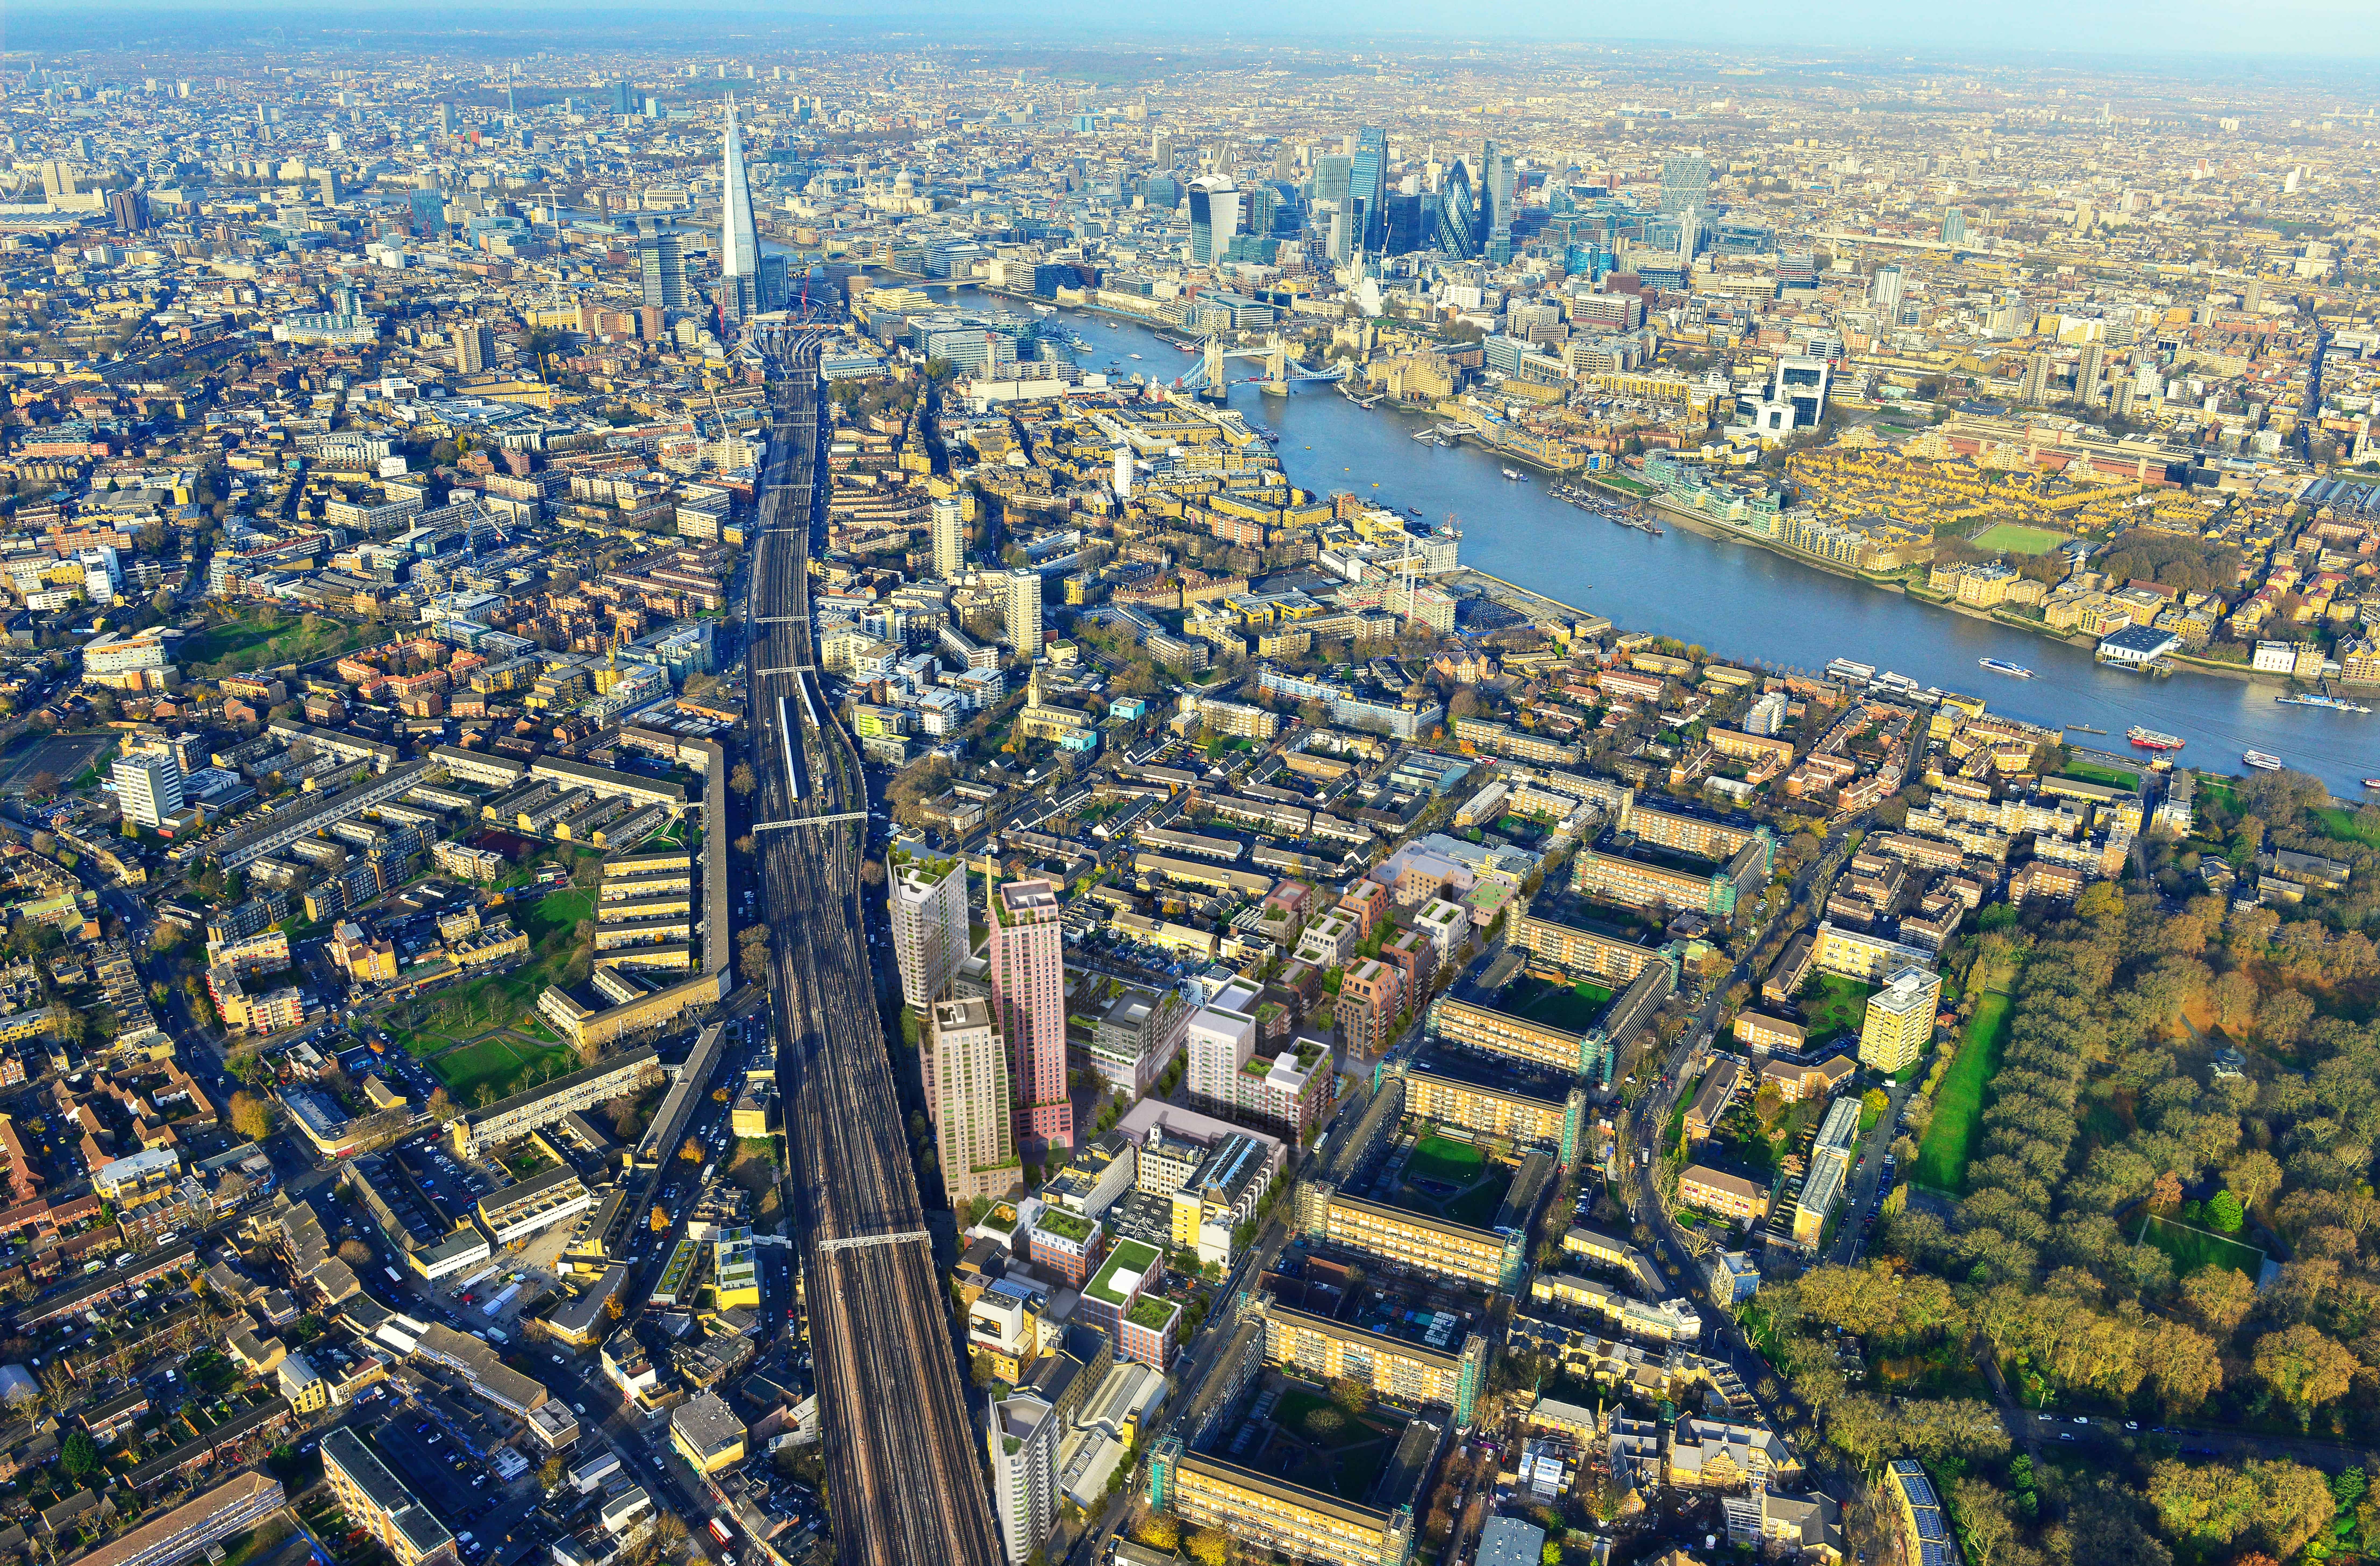 CGI image of the proposed development on the site of the former Peek Freans Biscuit Factory in Bermondsey